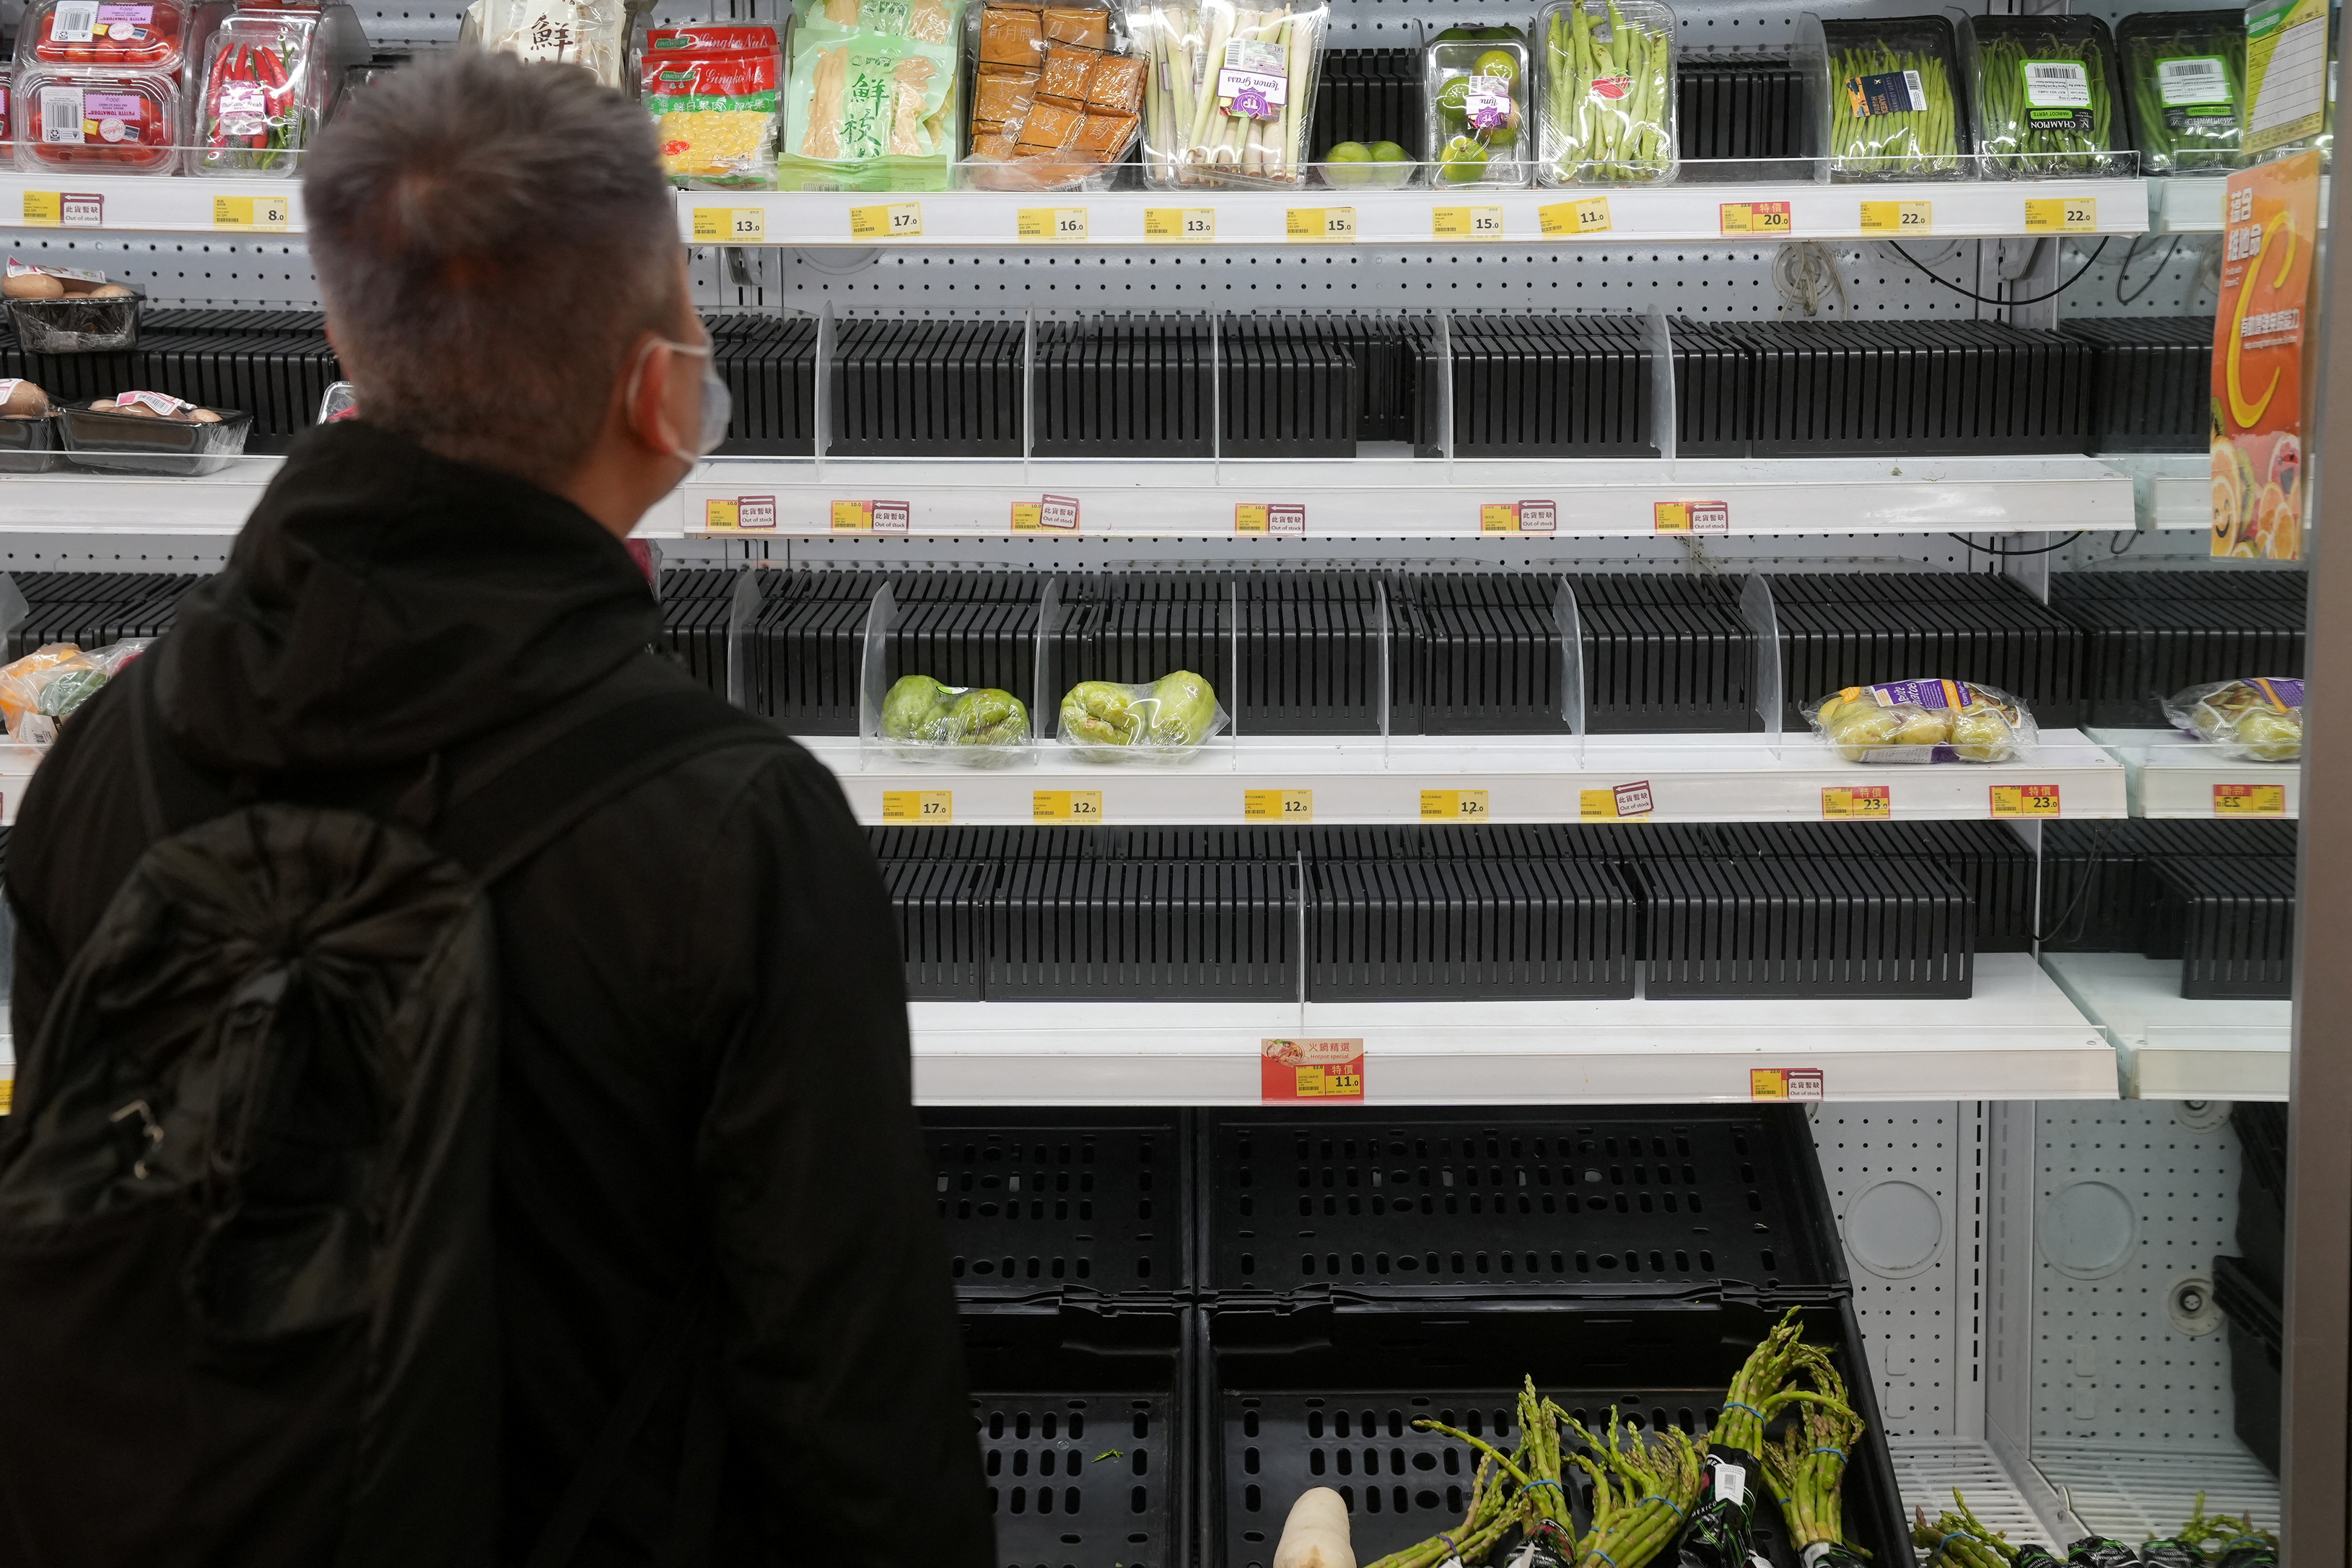 Customer wearing a face mask shops in front of partially empty shelves at a supermarket, following the outbreak of the coronavirus disease (COVID-19), at Sha Tin district